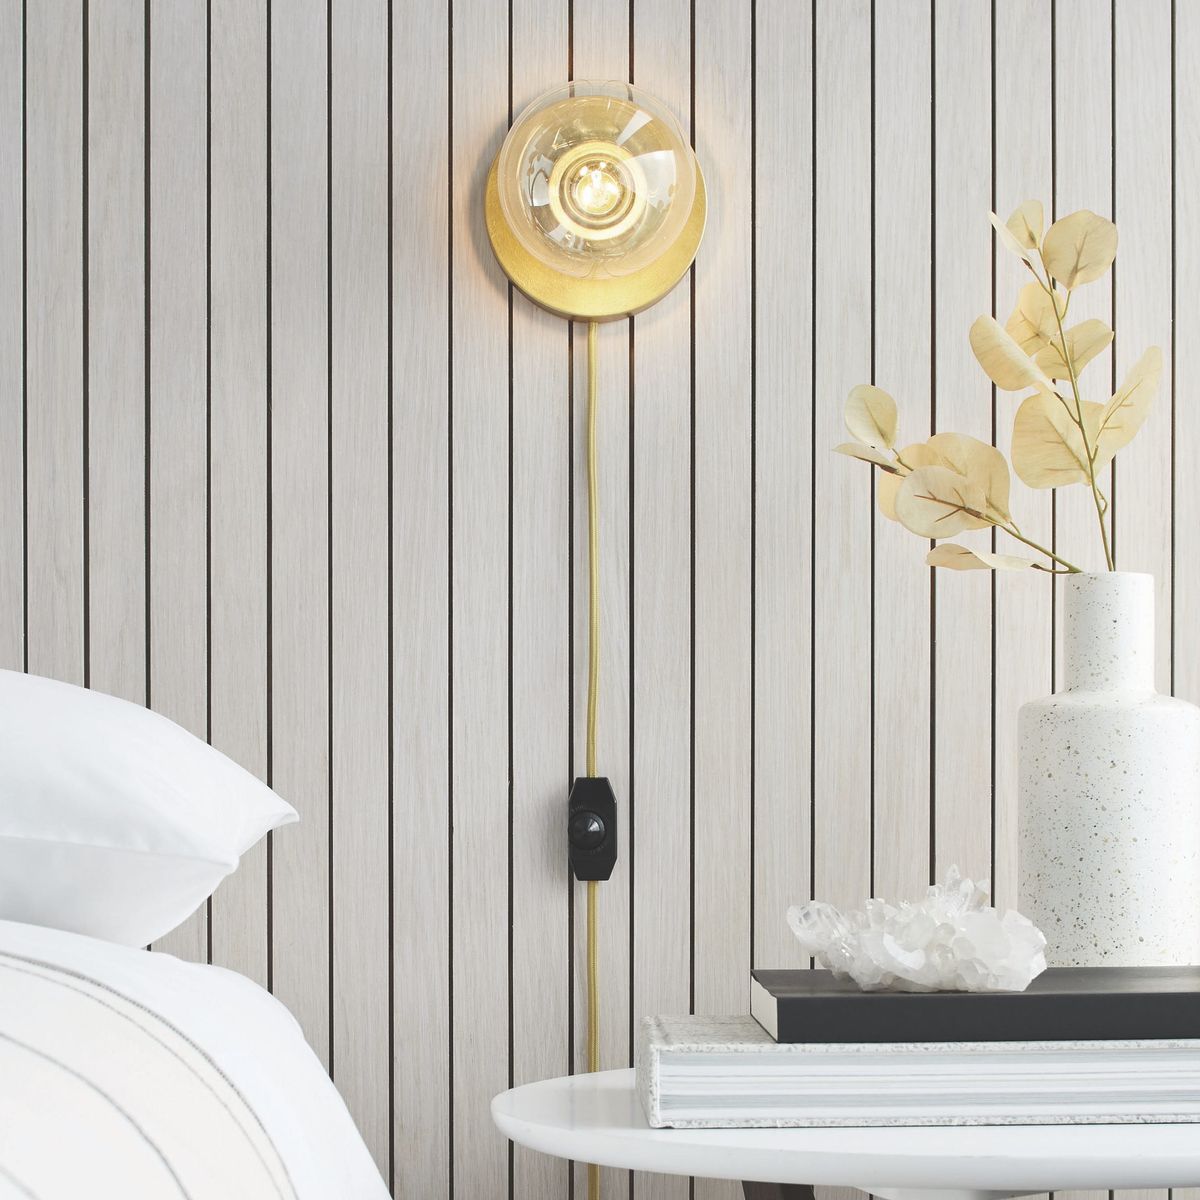 The Minimalist Brass-filled Target Collection We Can’t Wait to Get Our Hands On